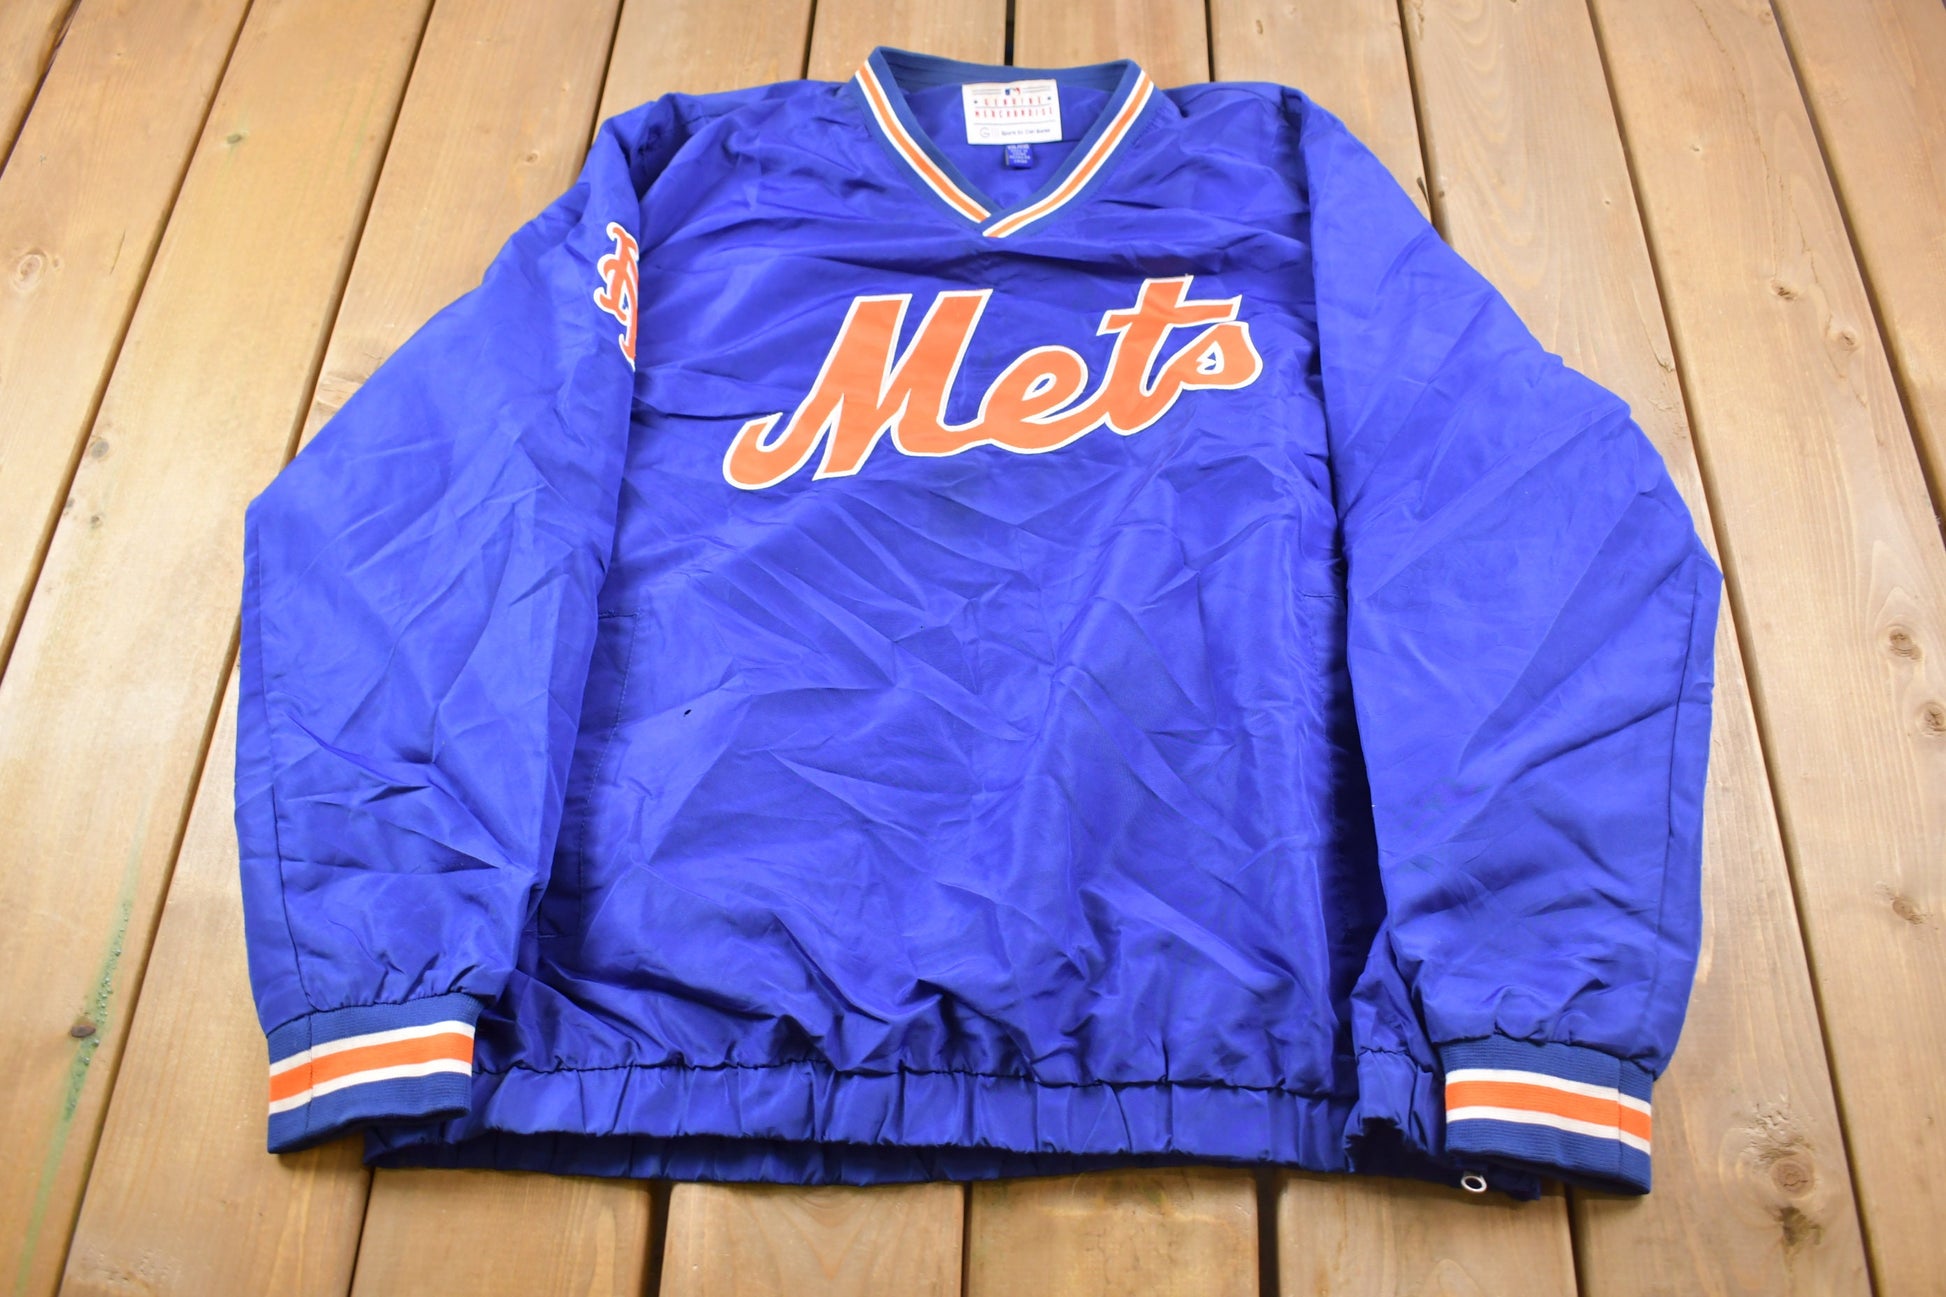 Lostboysvintage 1990s Vintage Majestic New York Mets MLB Jersey / Made in USA / 90s Jersey / Sportswear / Fan Gear / Athletic Pullover